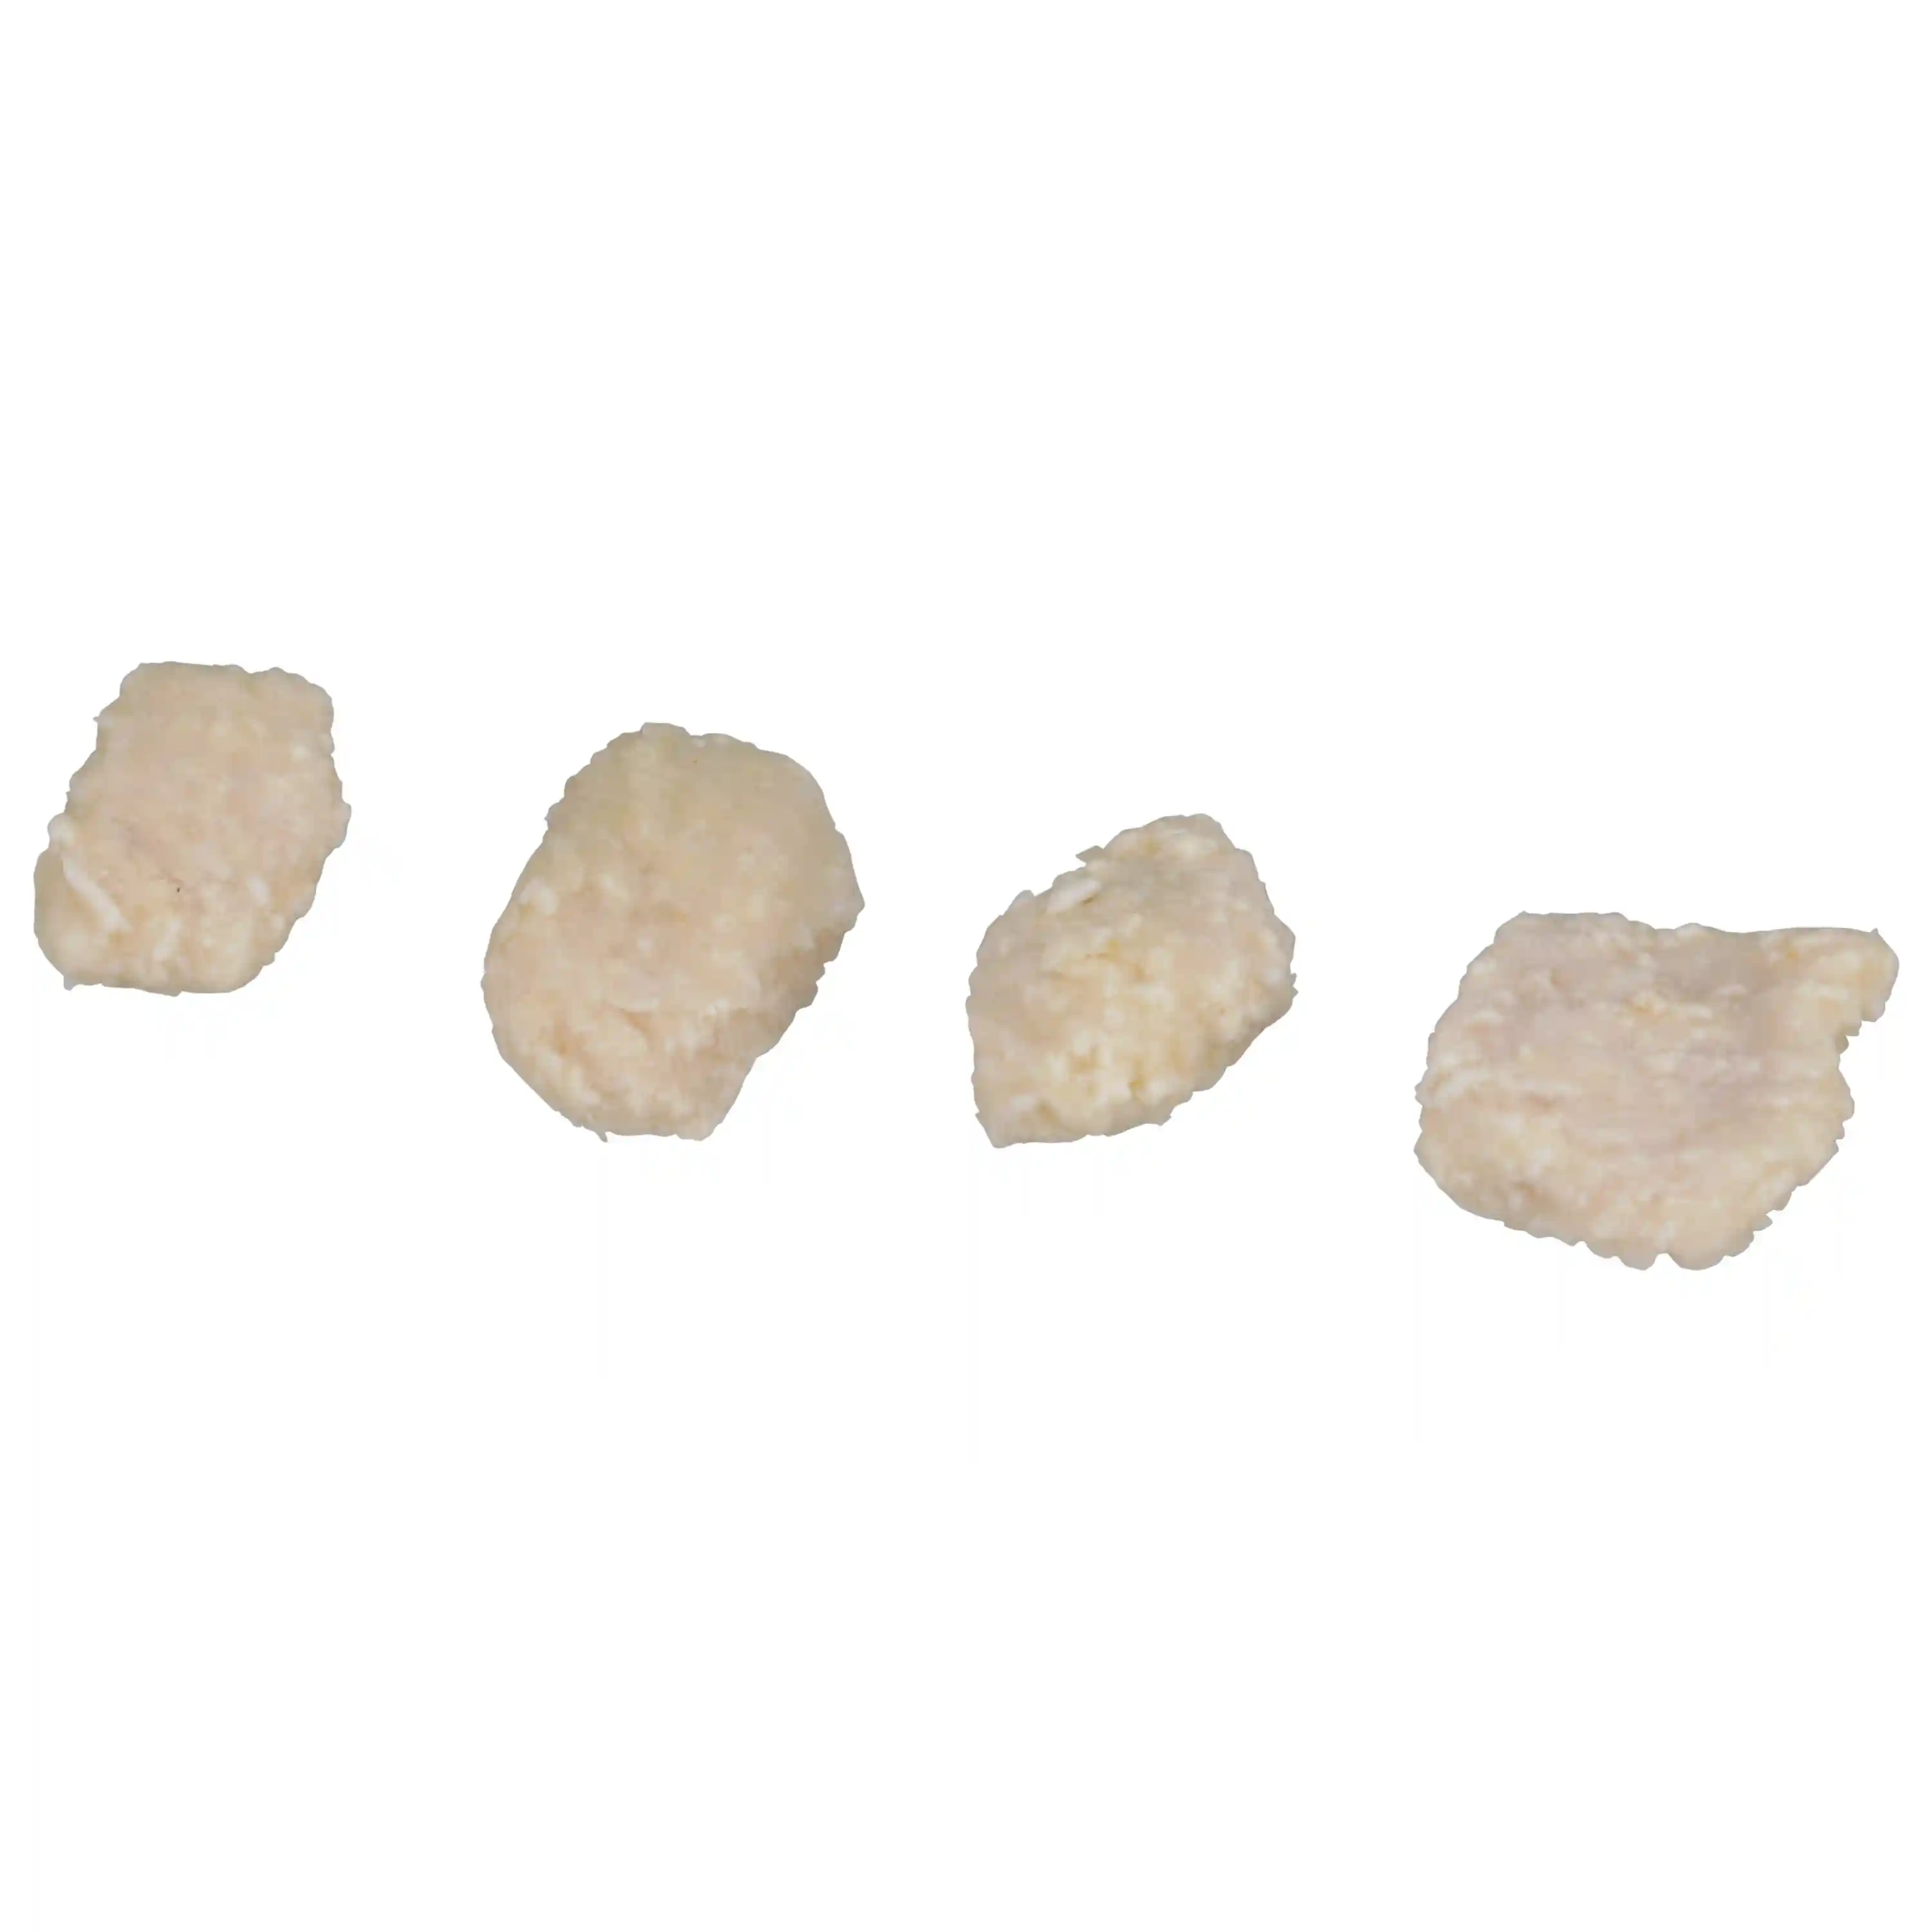 Tyson® Uncooked Battered Boneless Skinless Cubed Chicken Breast_image_11